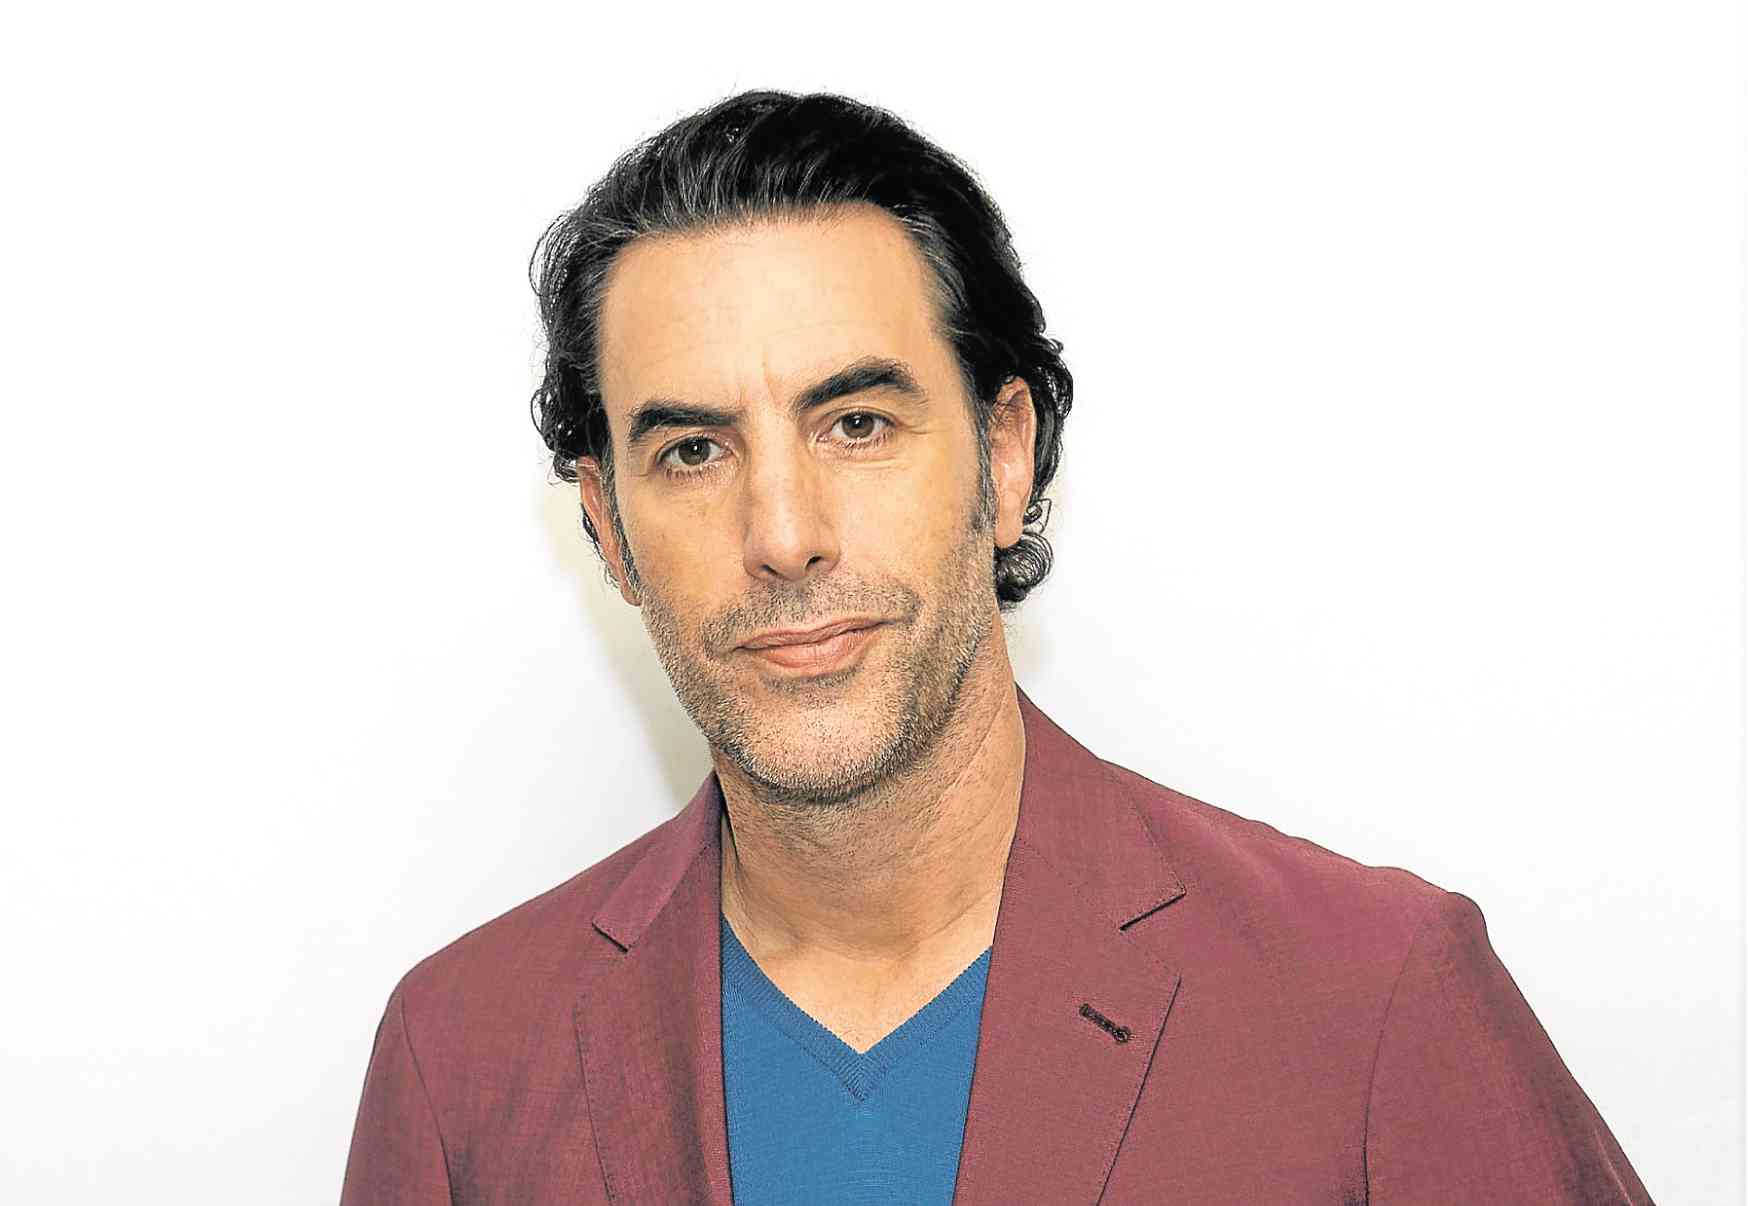 Sacha Baron Cohen: raunchy as usual but a bit serious this time